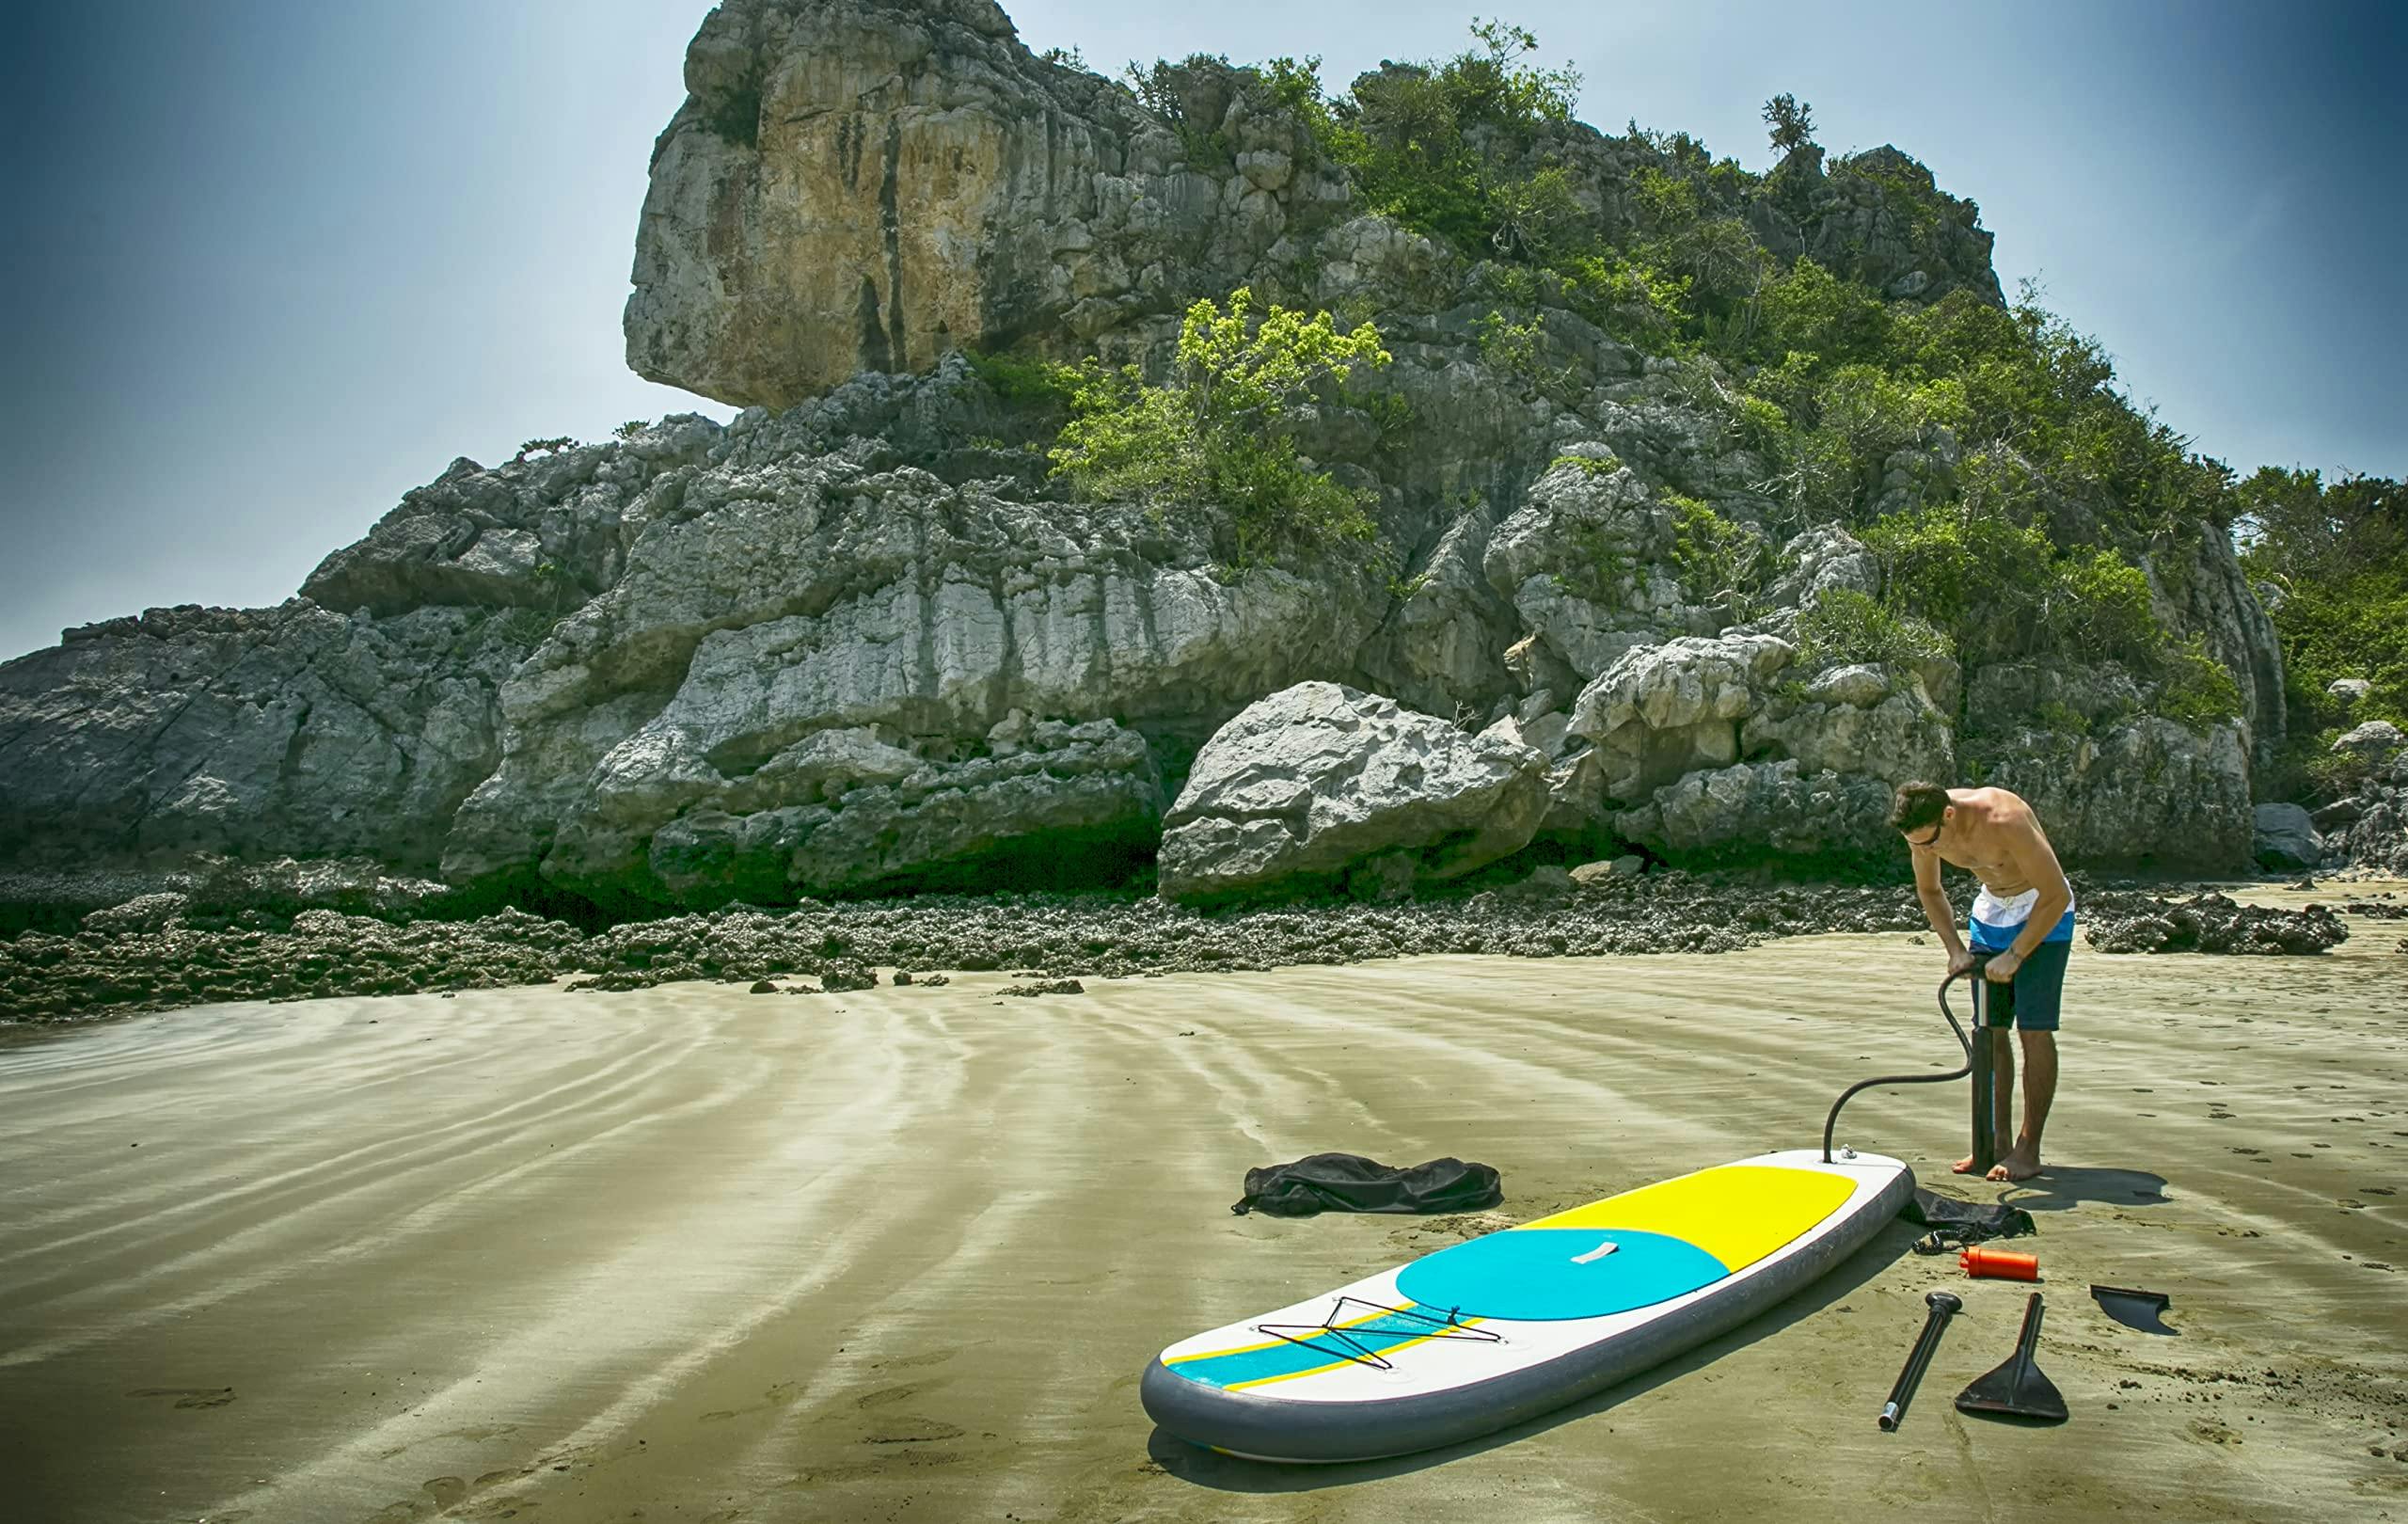 Hybrid Stand-Up Paddleboard/Kayak With Foot Pegs